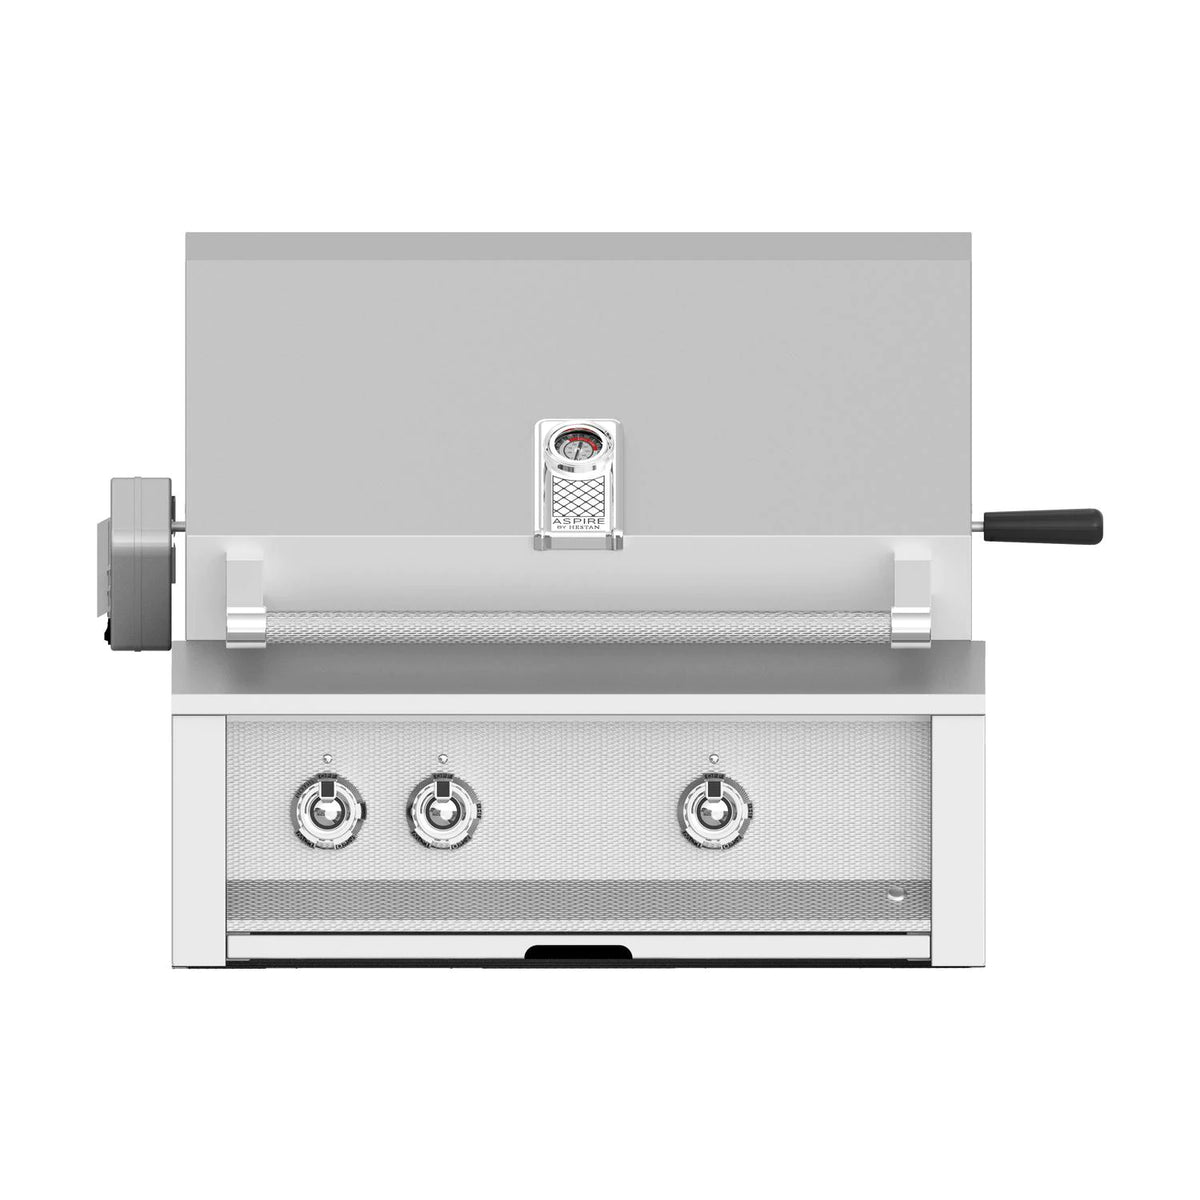 Aspire By Hestan 30-Inch Built-In Gas Grill with Sear Burner and Rotisserie Front View